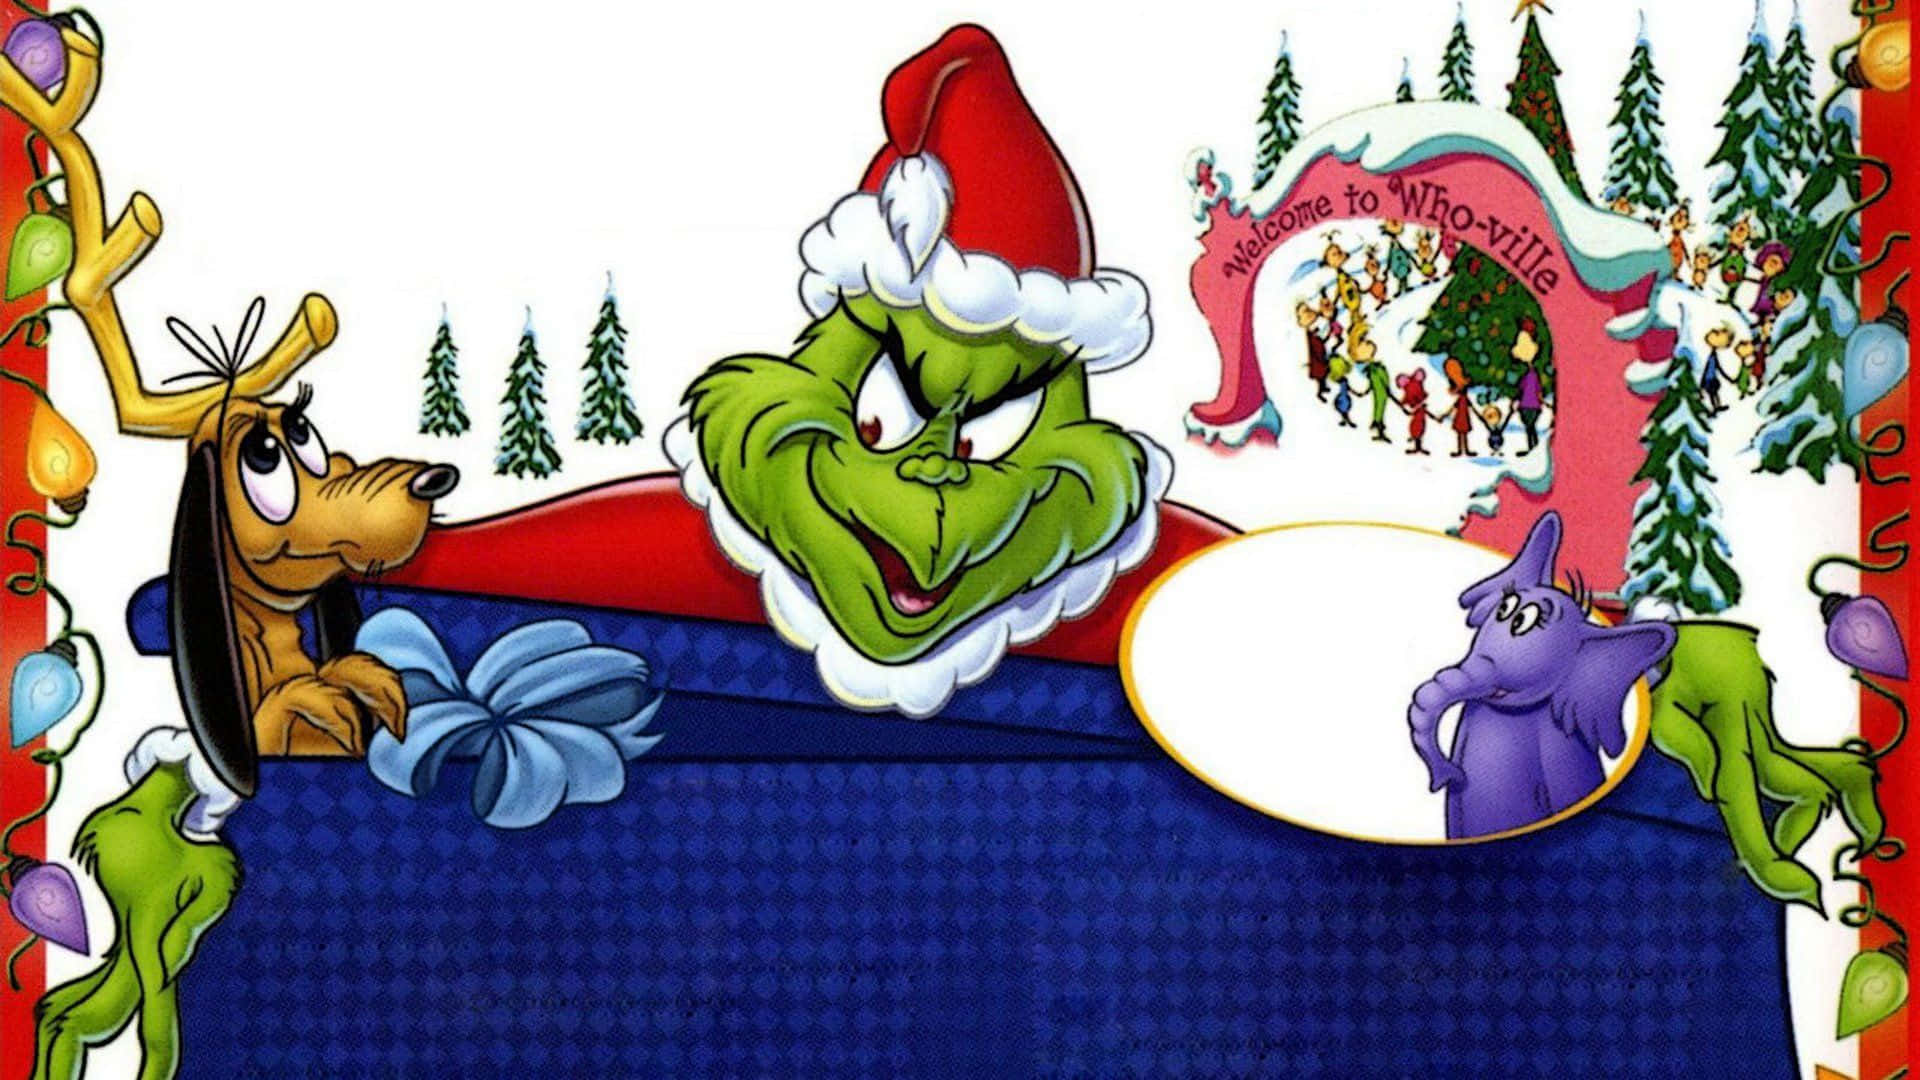 The Grinch Christmas Card Wallpaper